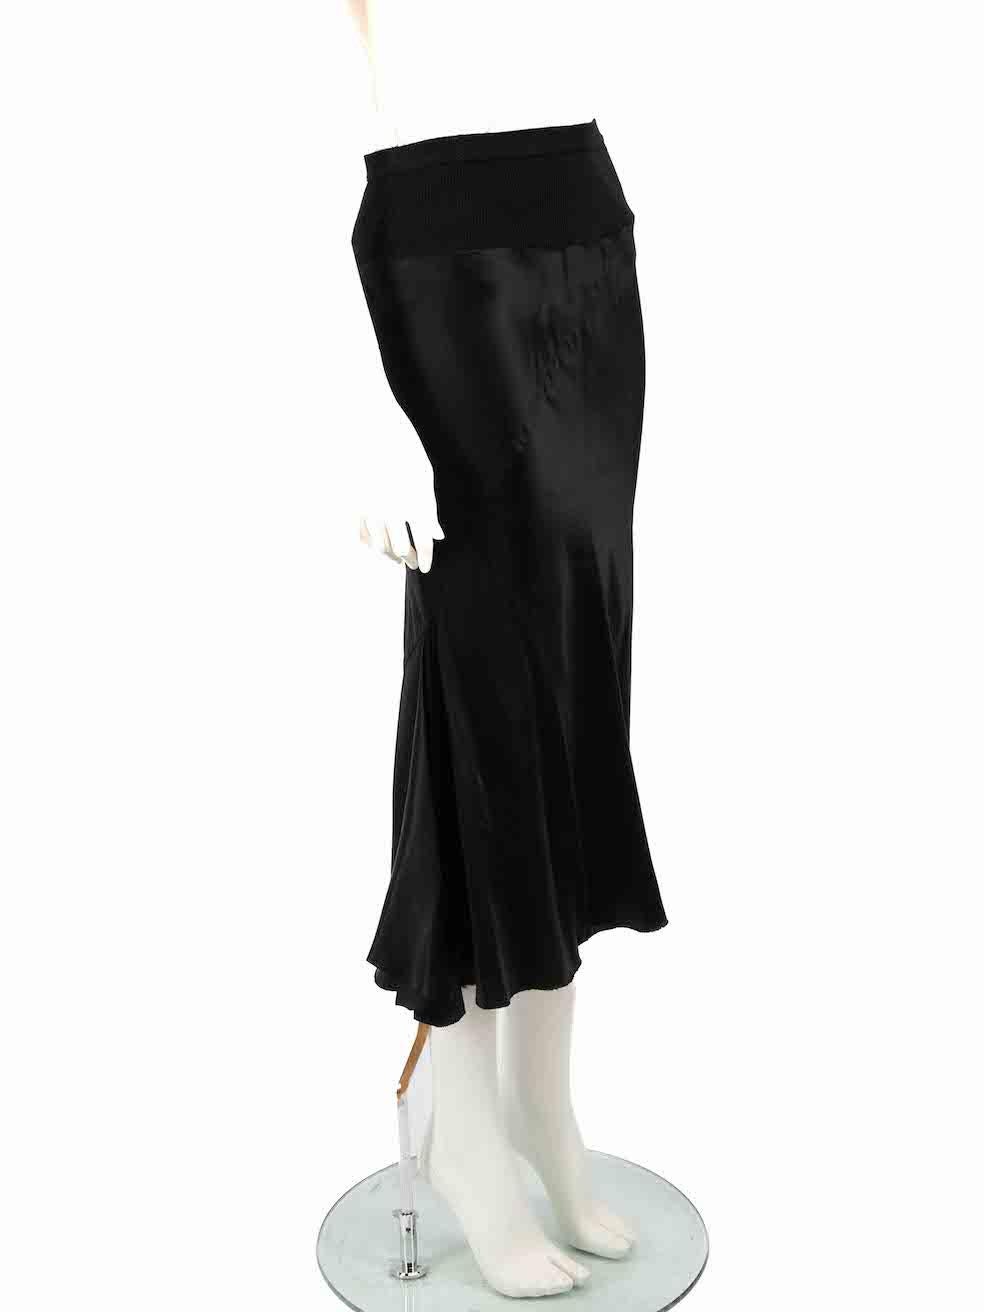 CONDITION is Good. Minor wear to skirt is evident. Light pulls to overall satin on this used Rick Owens designer resale item.
 
 
 
 Details
 
 
 Sisyphus F/W 18
 
 Black
 
 Cupro satin
 
 Skirt
 
 Midi
 
 Elasticated waistband
 
 Raw hem
 
 
 
 
 
